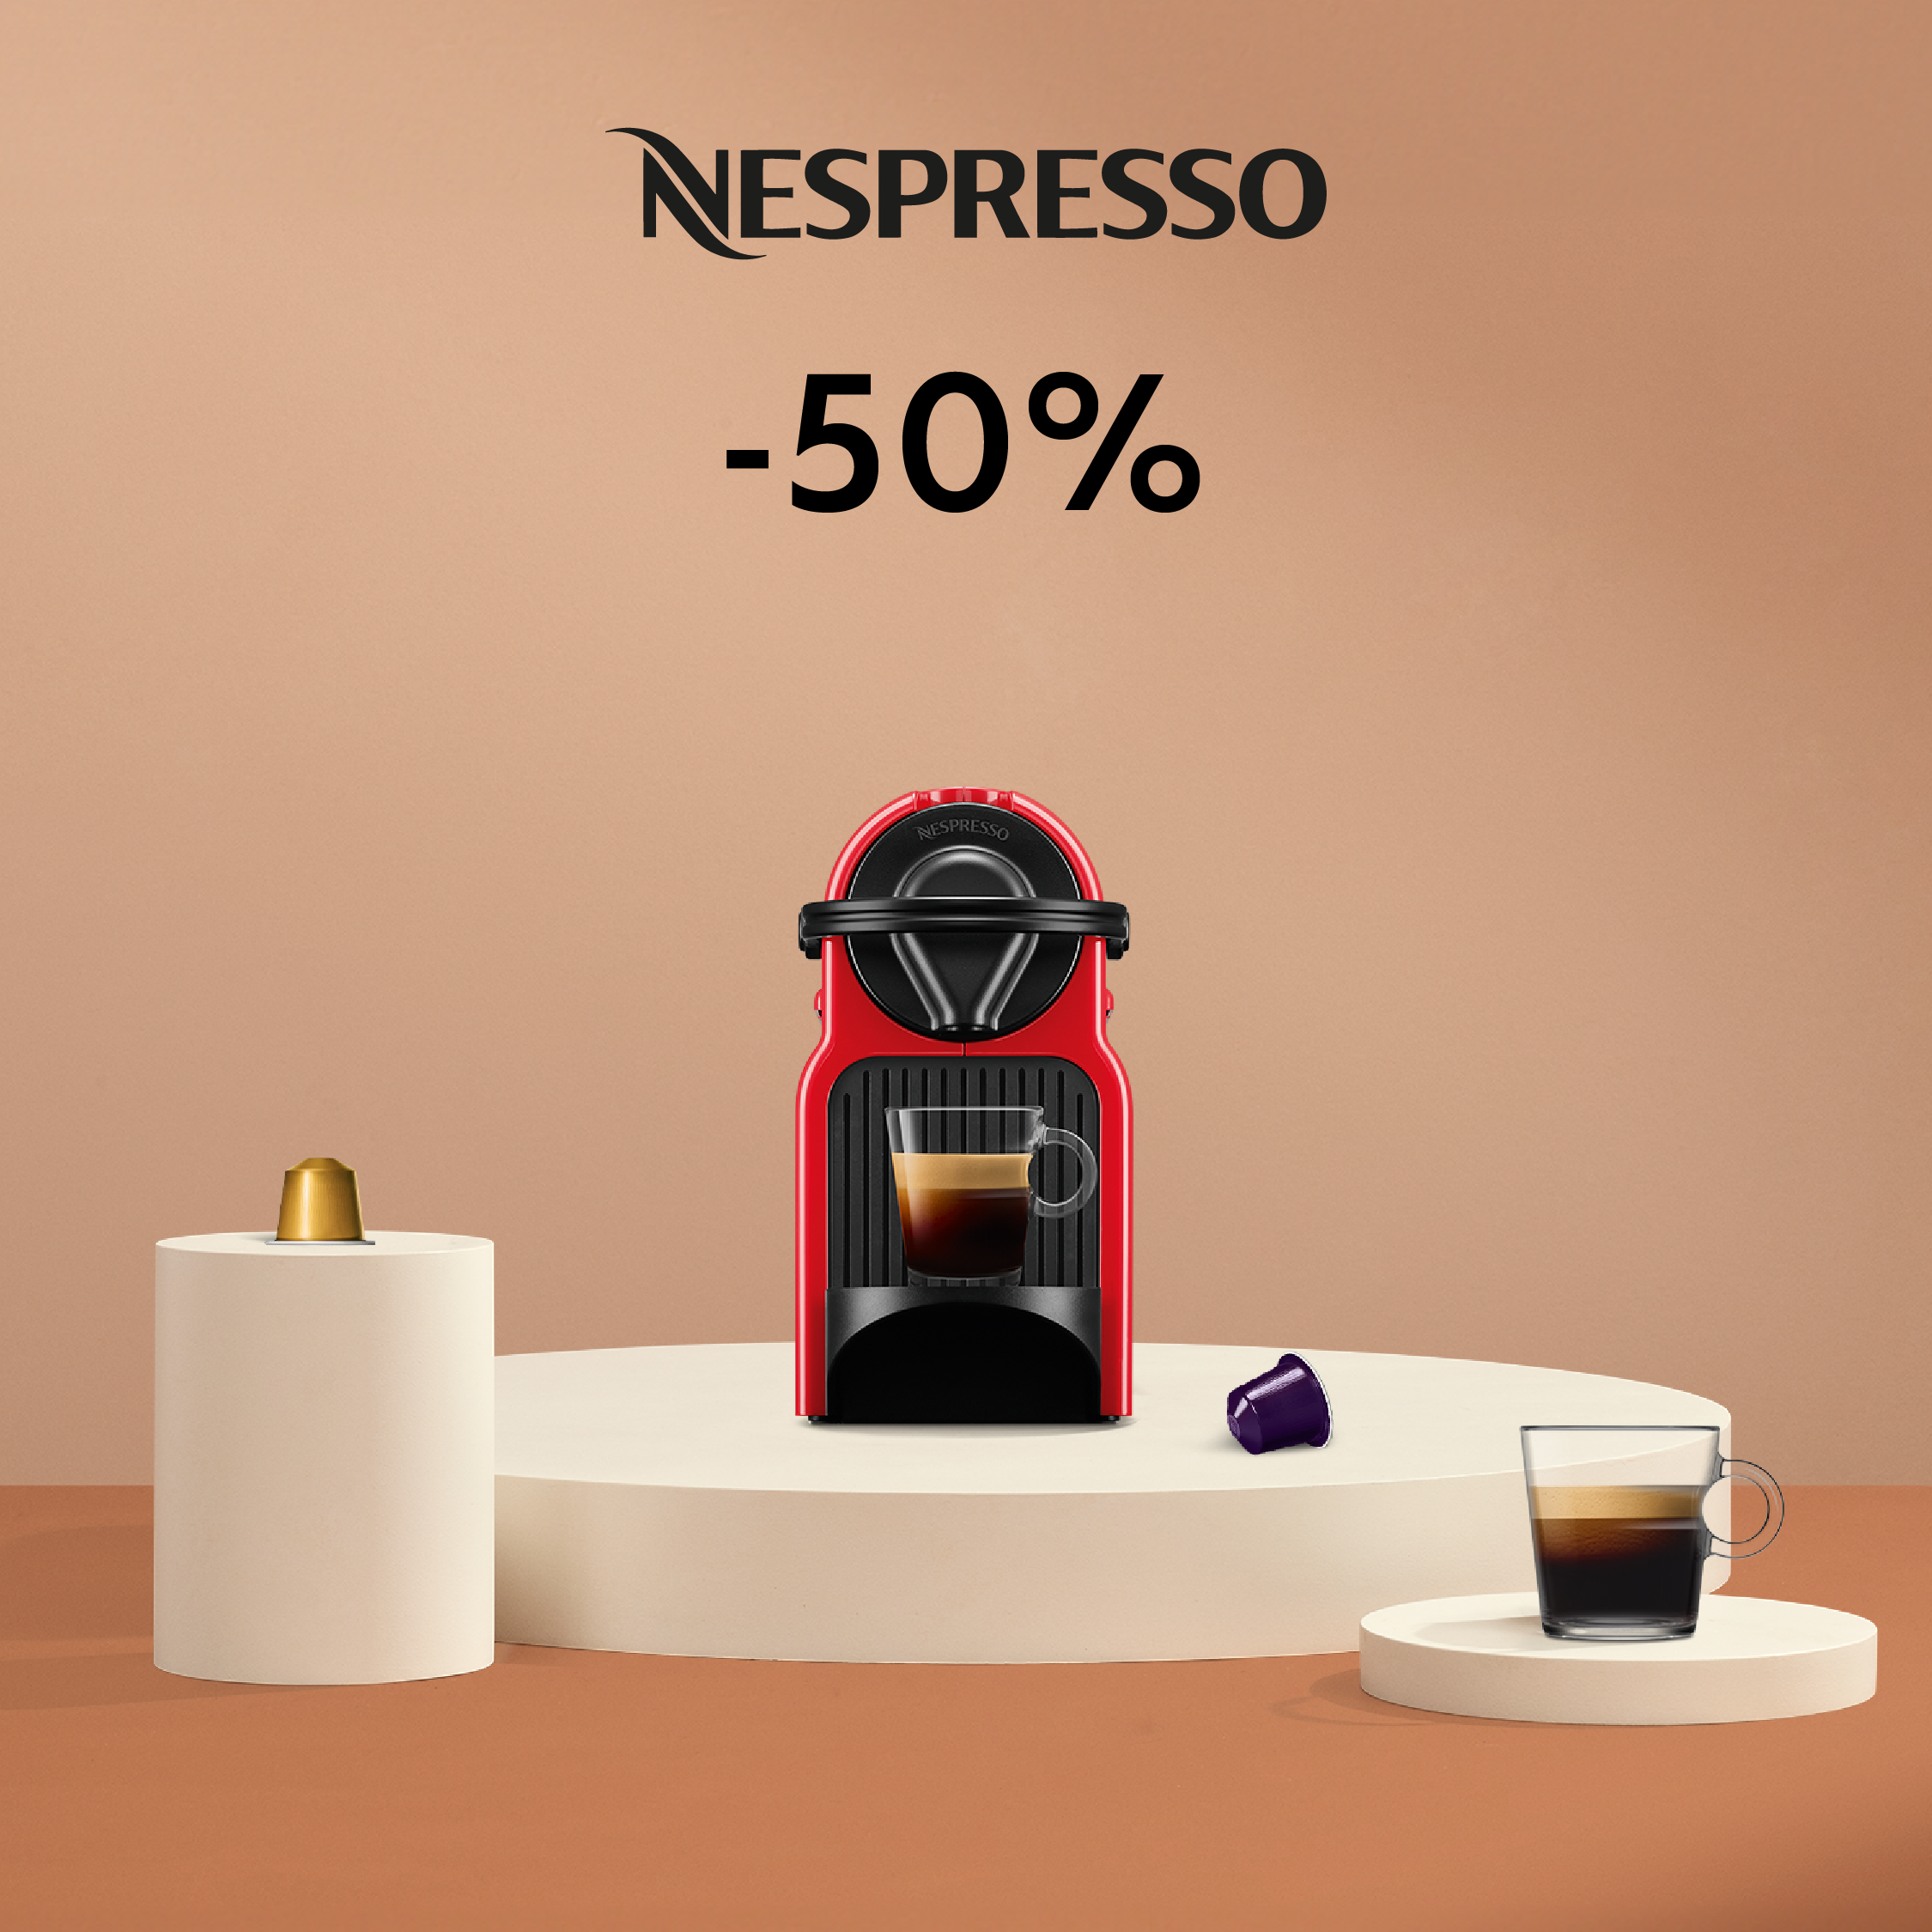 50% DISCOUNT ON THE INISSIA COFFEE MACHINE WHEN YOU BUY 150 CAPSULES!